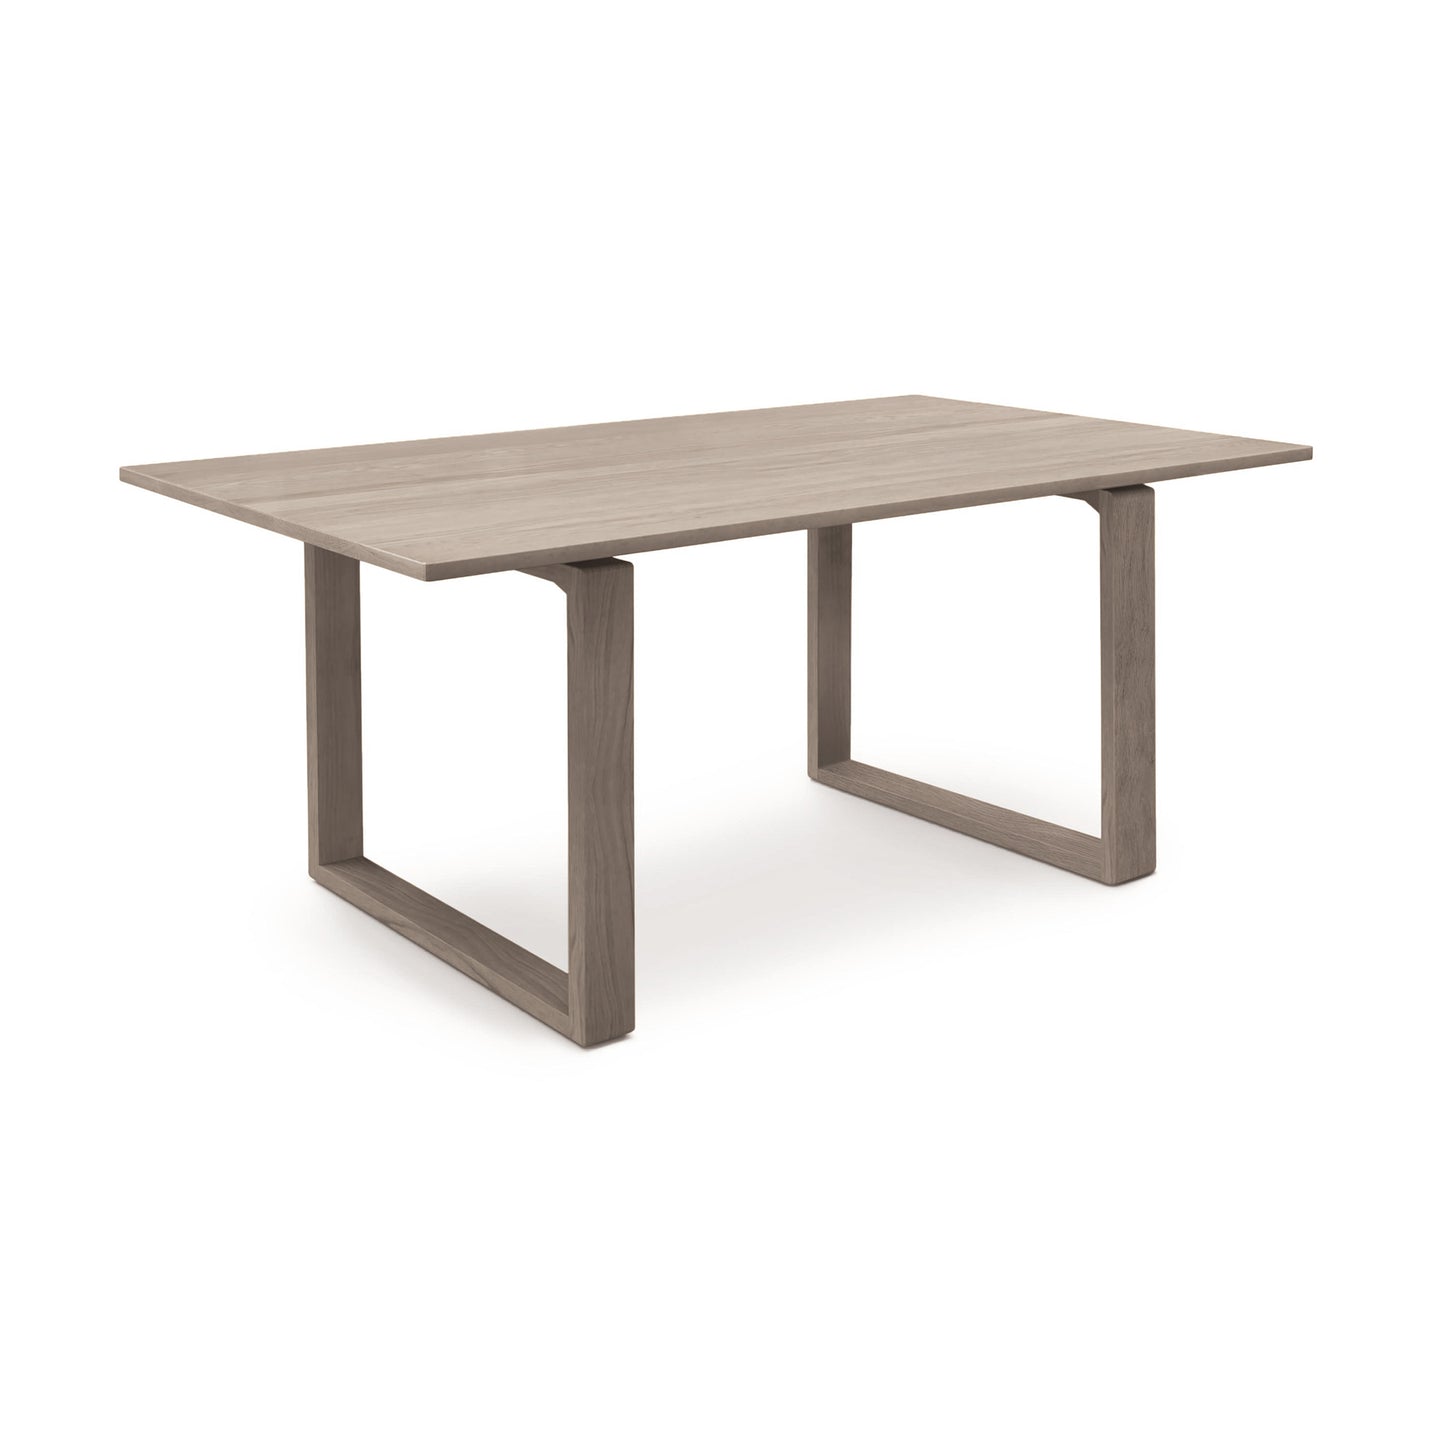 A rectangular Copeland Furniture Iso Solid Top Dining Table with a minimalist design, featuring straight legs connected by a horizontal bar, displayed on a white background.